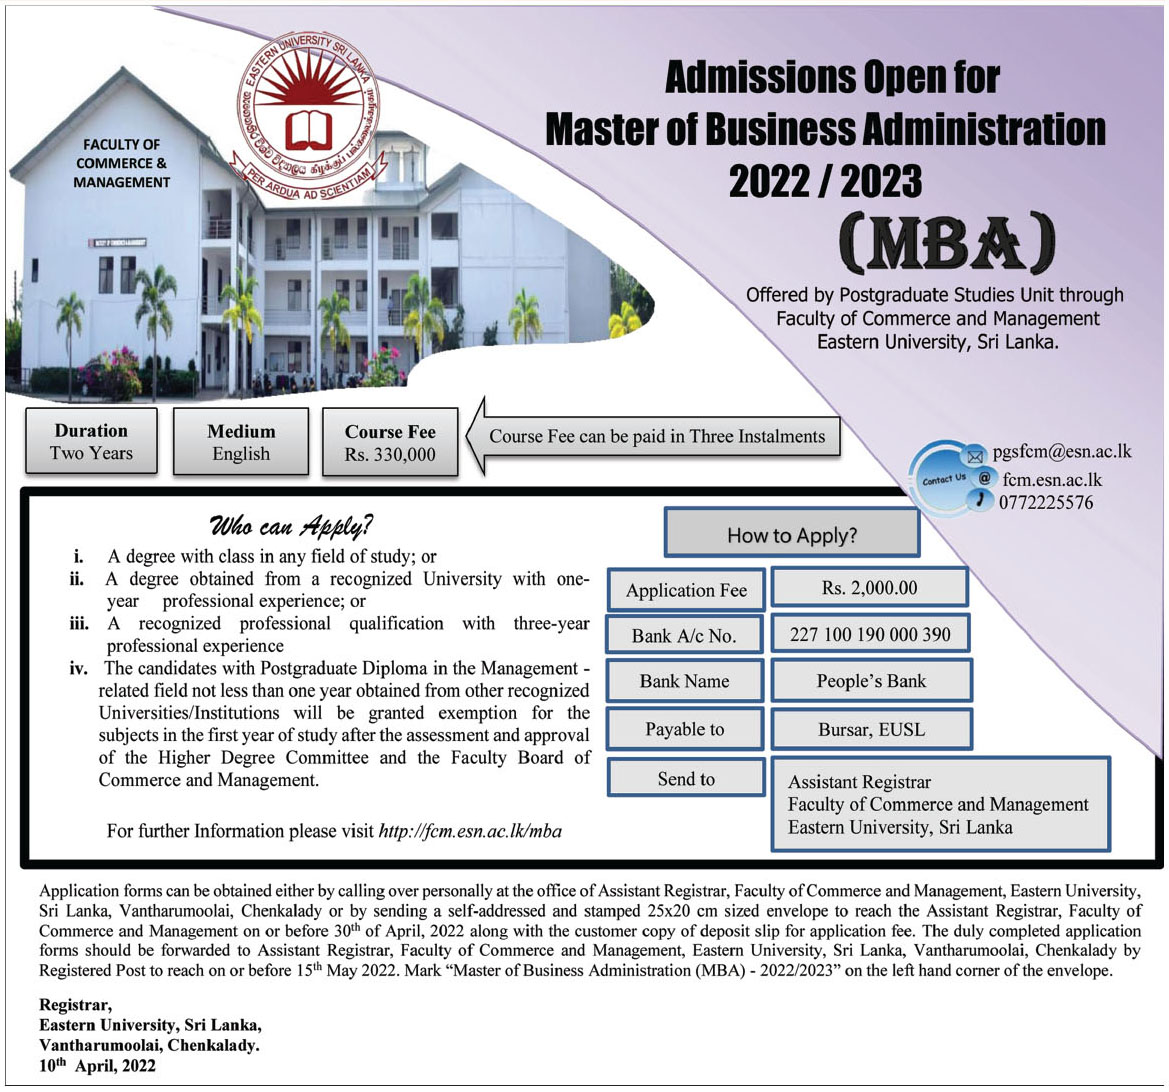 Master of Business Administration (MBA) Programme 2022 - Eastern University